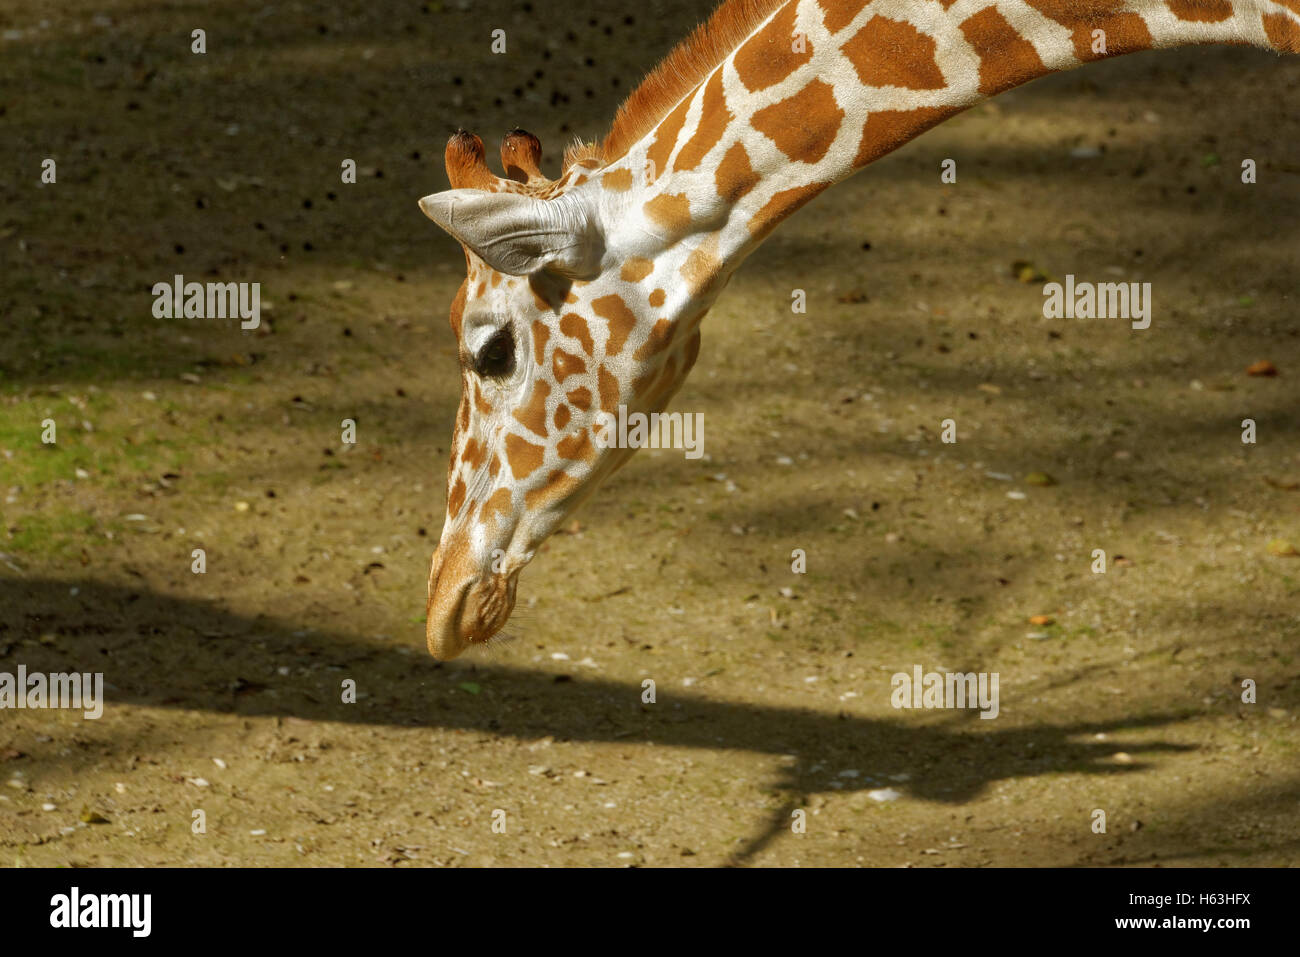 Giraffe (Giraffa camelopardalis) is an African even-toed ungulate mammal, the tallest living terrestrial animal and the largest Stock Photo